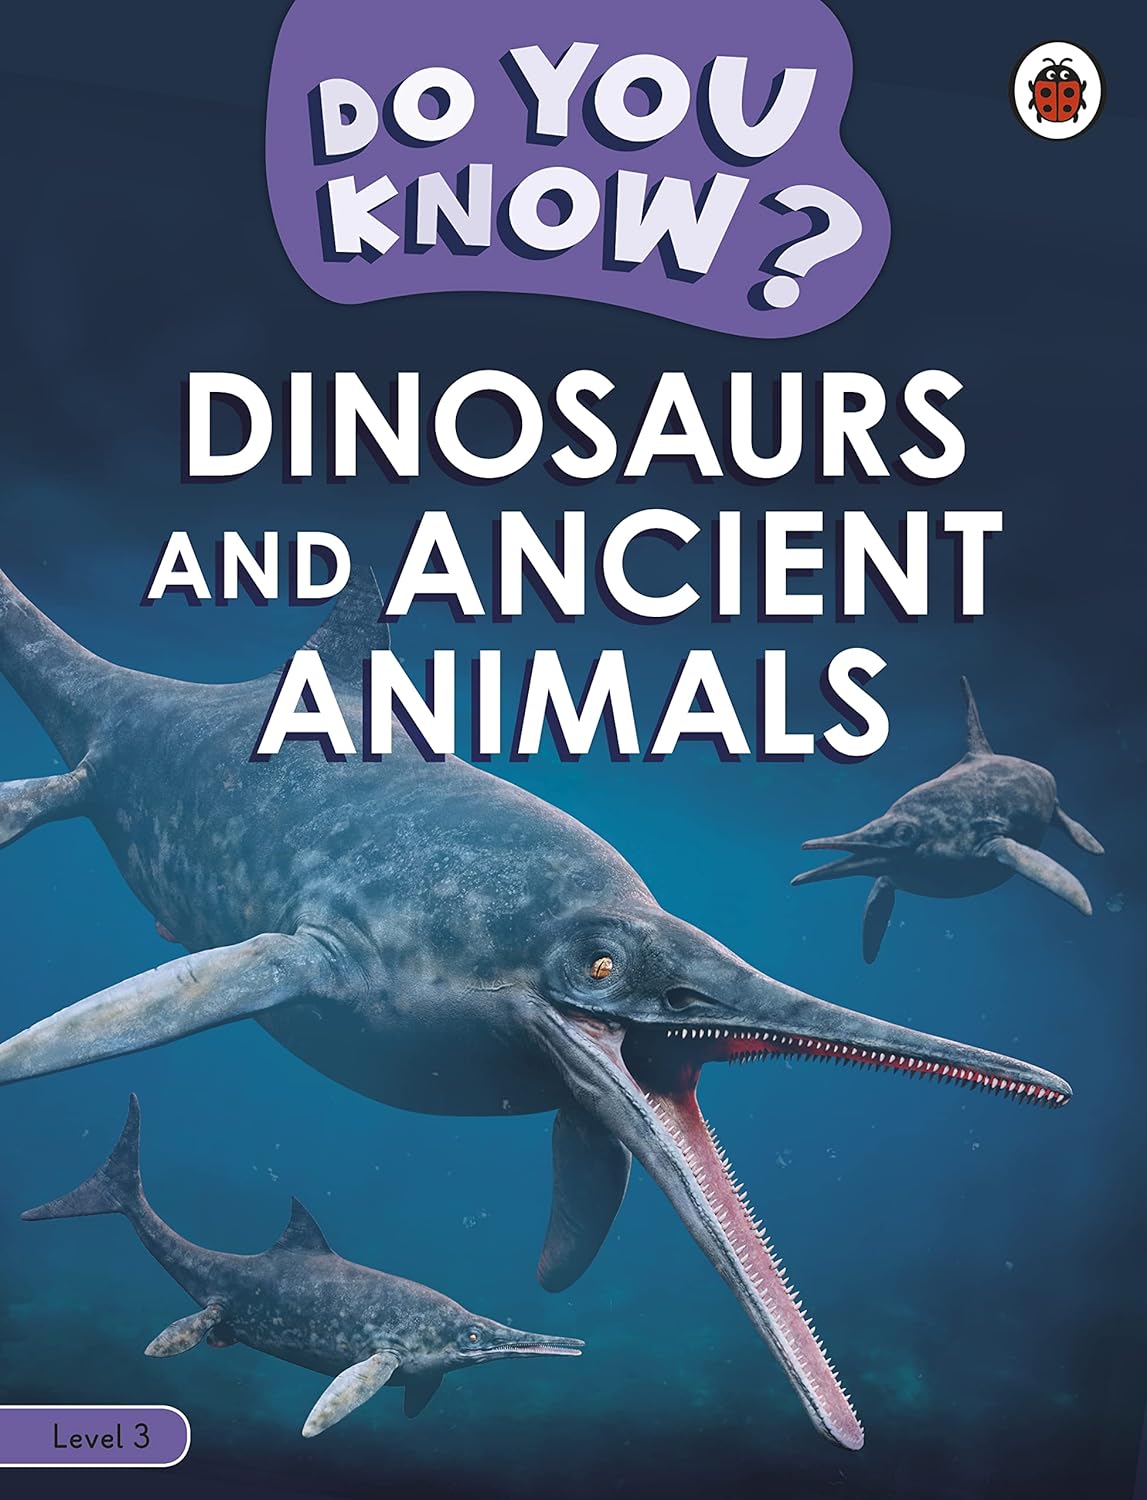 Do You Know? Level 3 - Dinosaurs And Anc